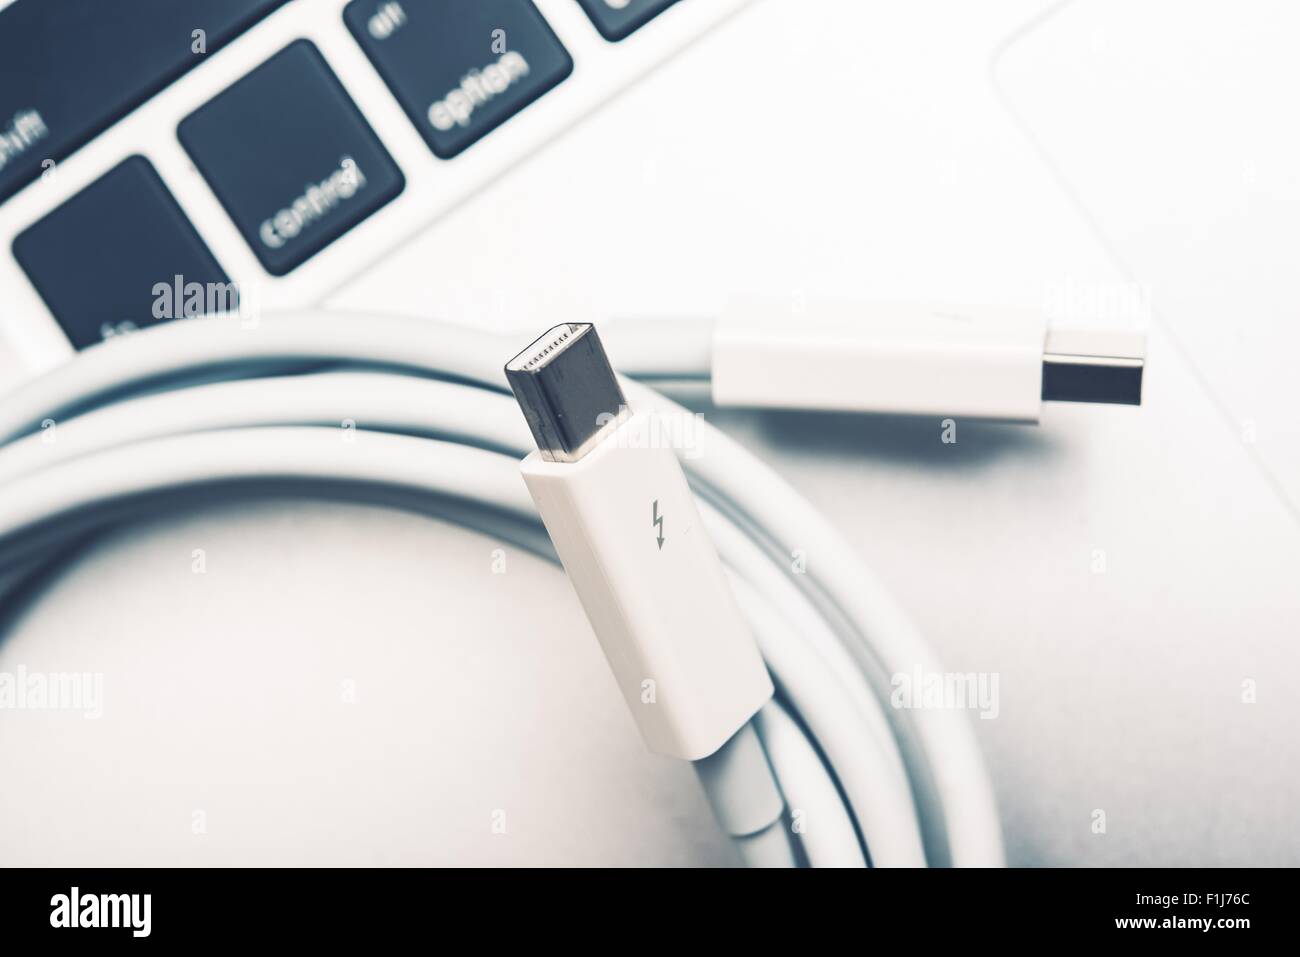 White Thunderbolt Cable and the Laptop Keyboard Stock Photo